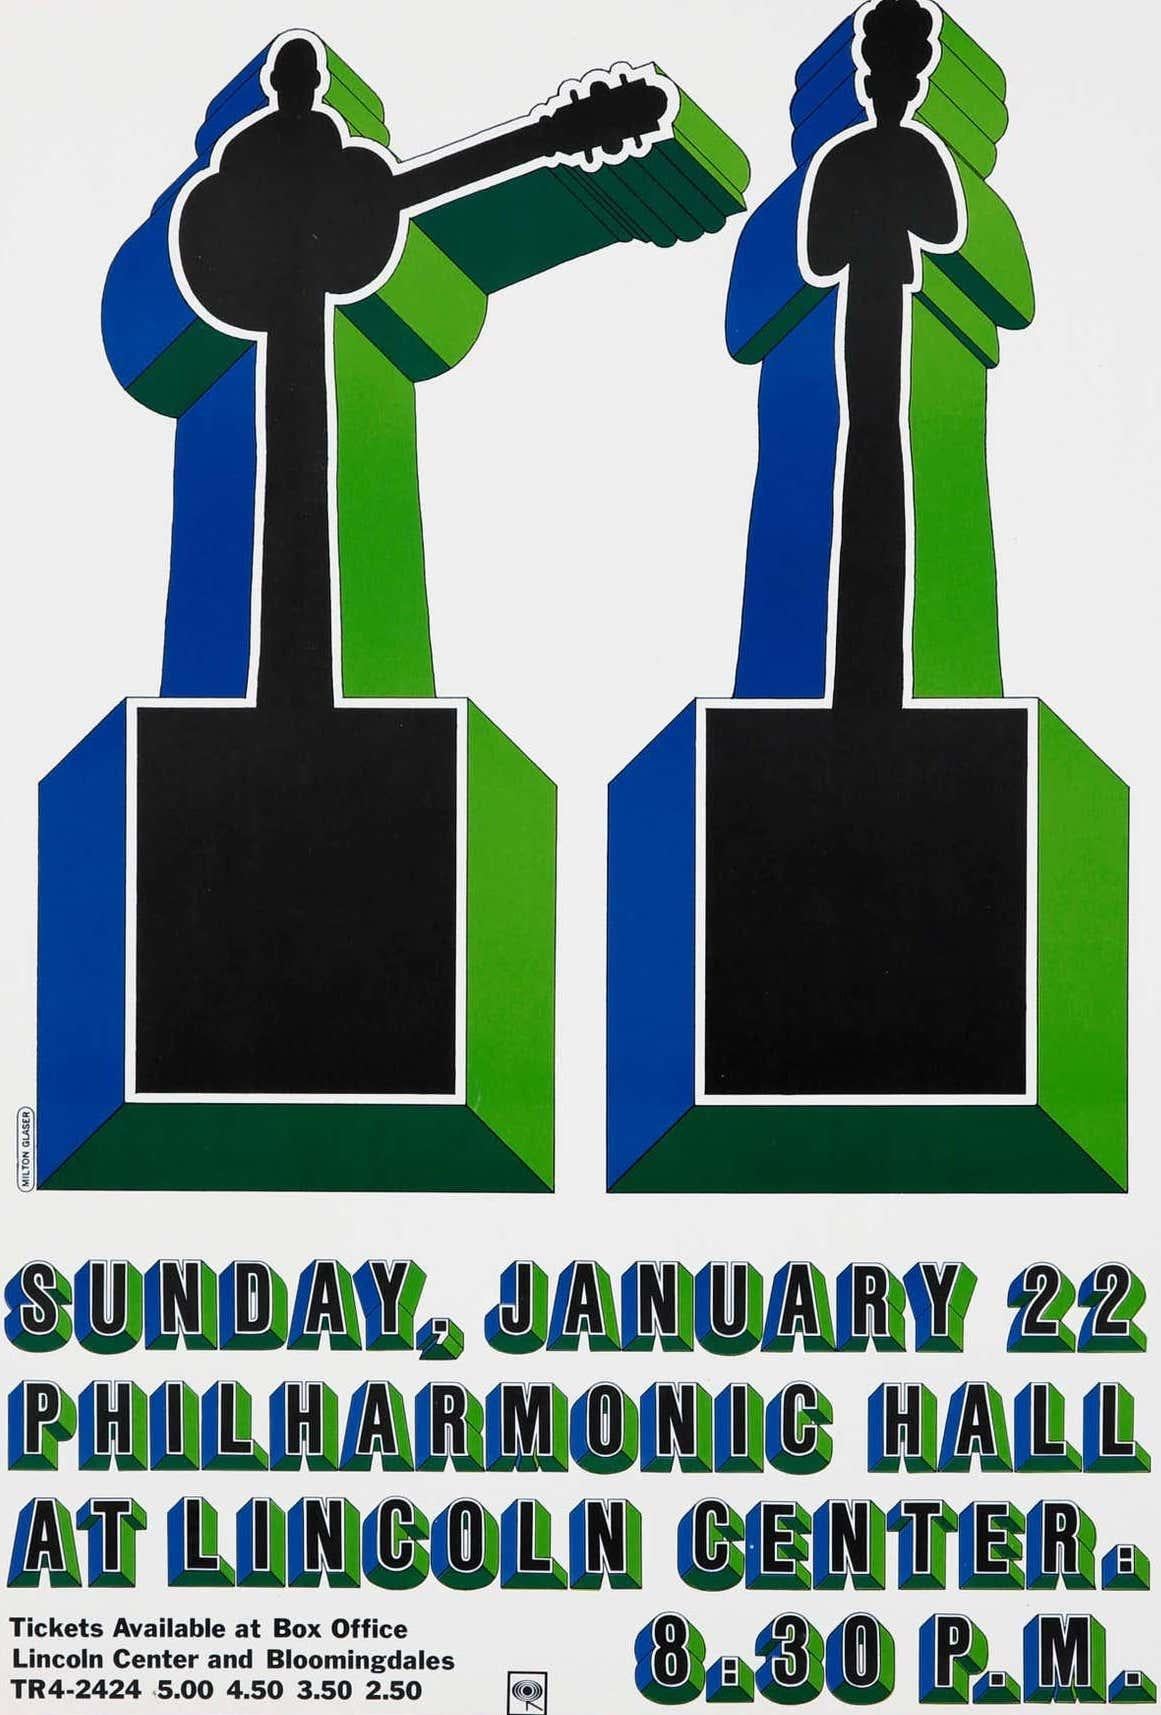 Vintage Original Milton Glaser, Simon and Garfunkel Concert Poster, New York, 1967:
On January 22nd, 1967, Simon & Garfunkel performed at Philharmonic Hall at Lincoln Center in New York City. For the poster, Milton Glaser raised the folk icons on a